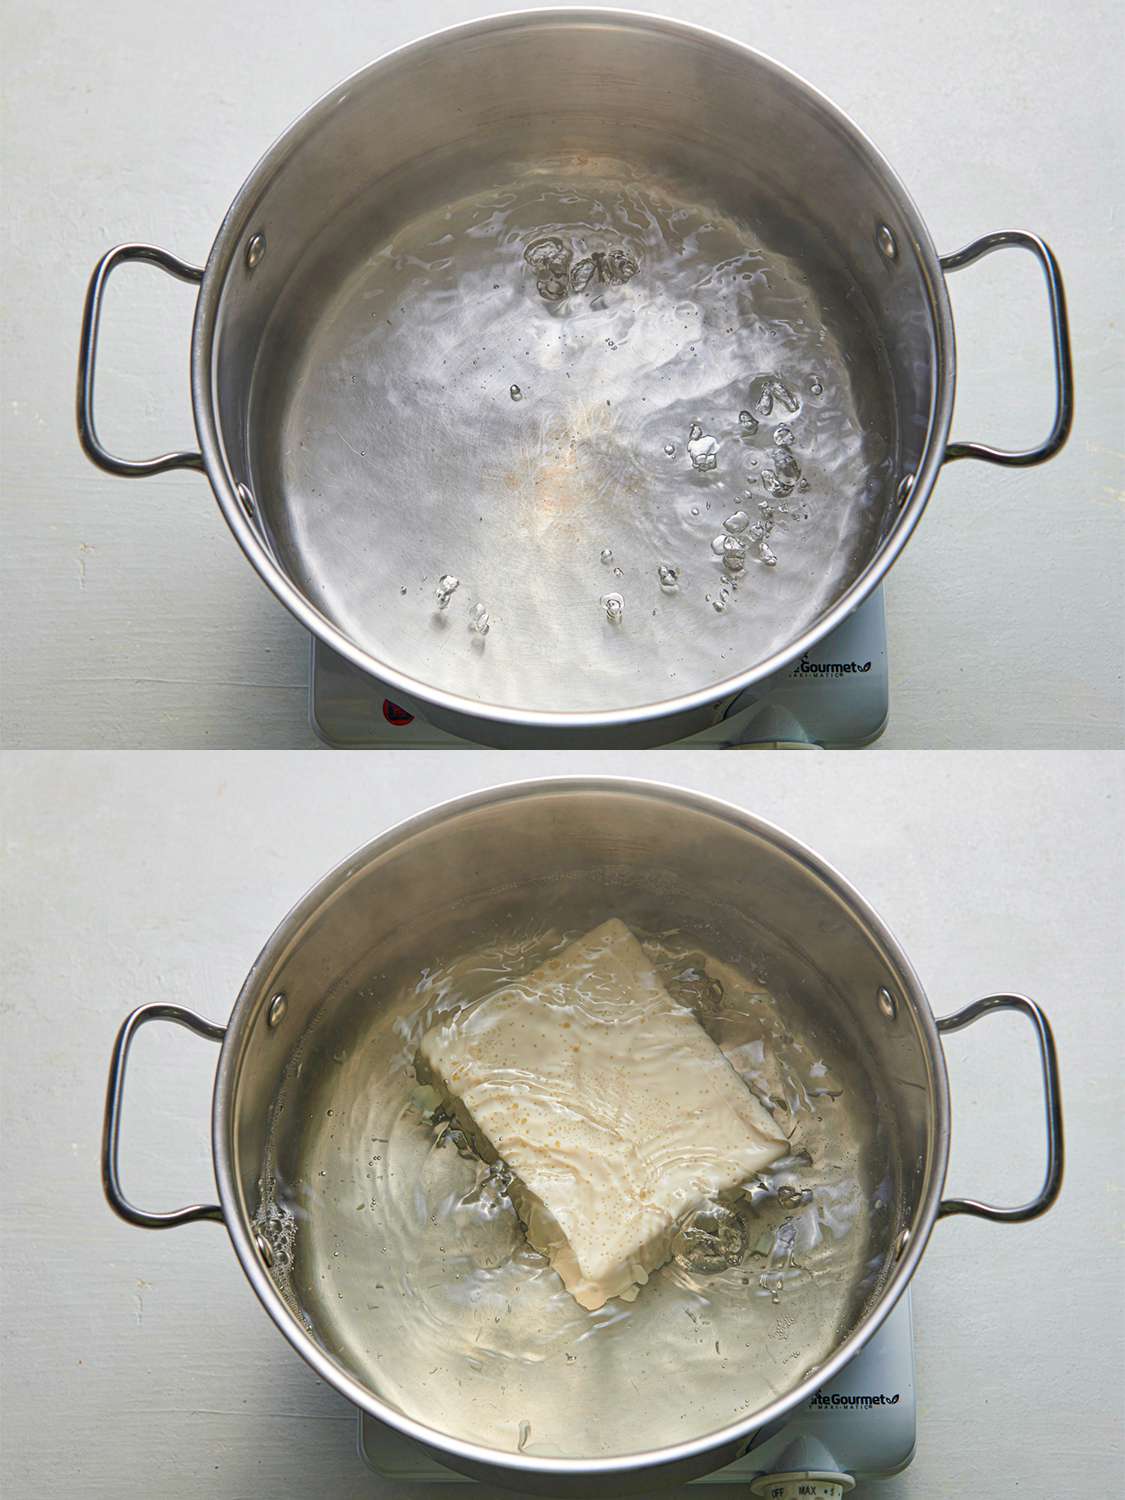 A two-image collage. The top image shows a stainless steel pot holding simmering water. The bottom image shows the pot how holding a block of silken tofu.